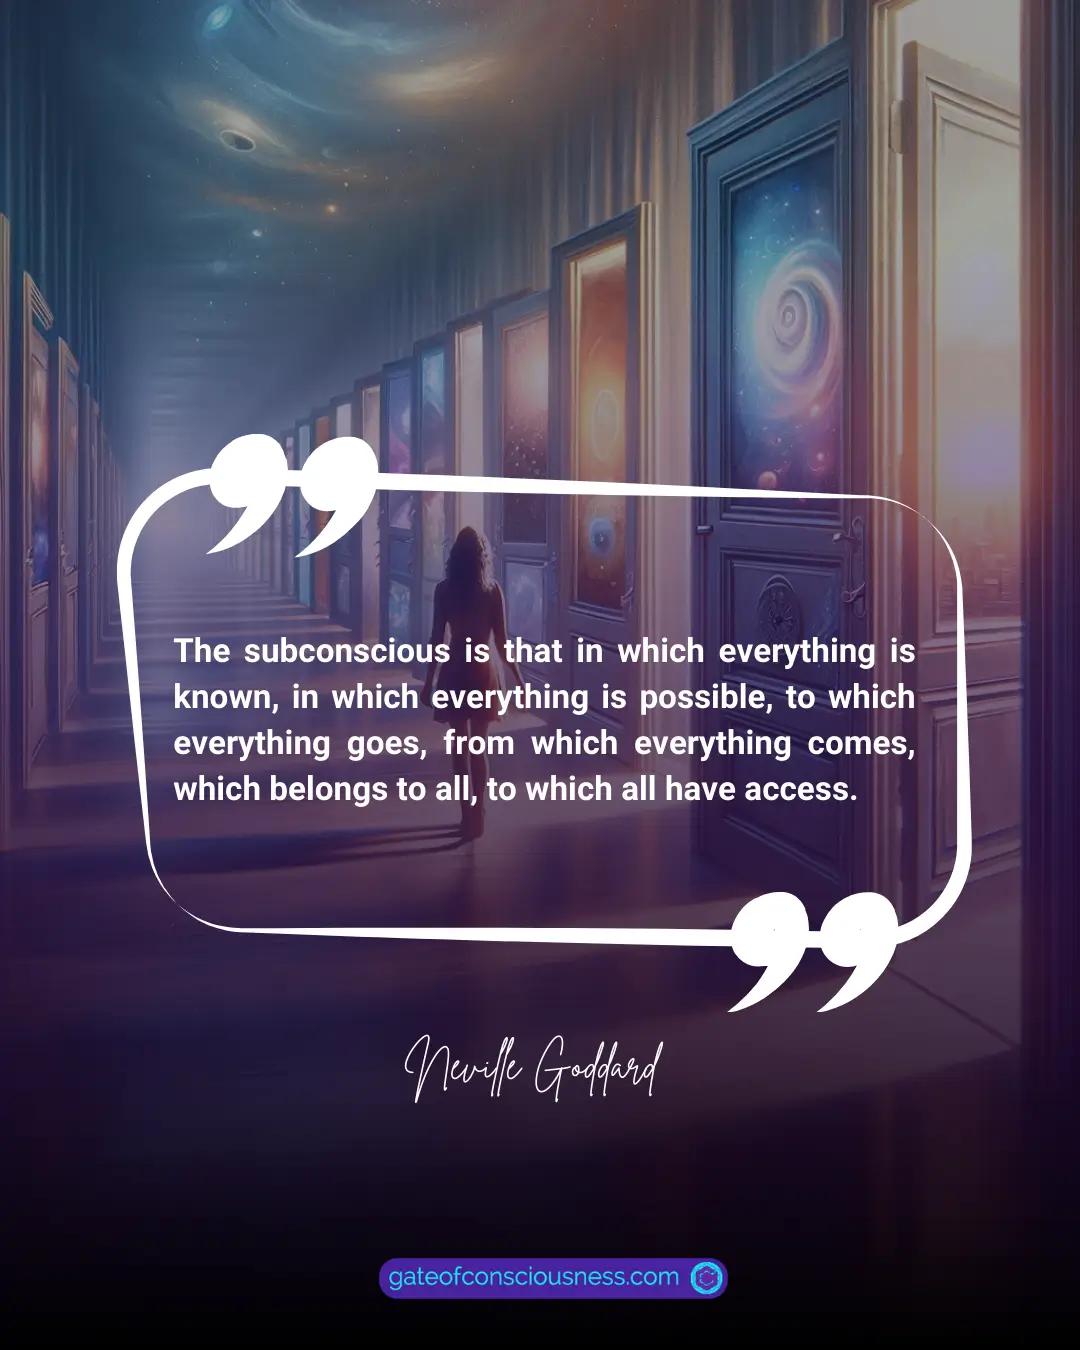 A quote from Neville Goddard